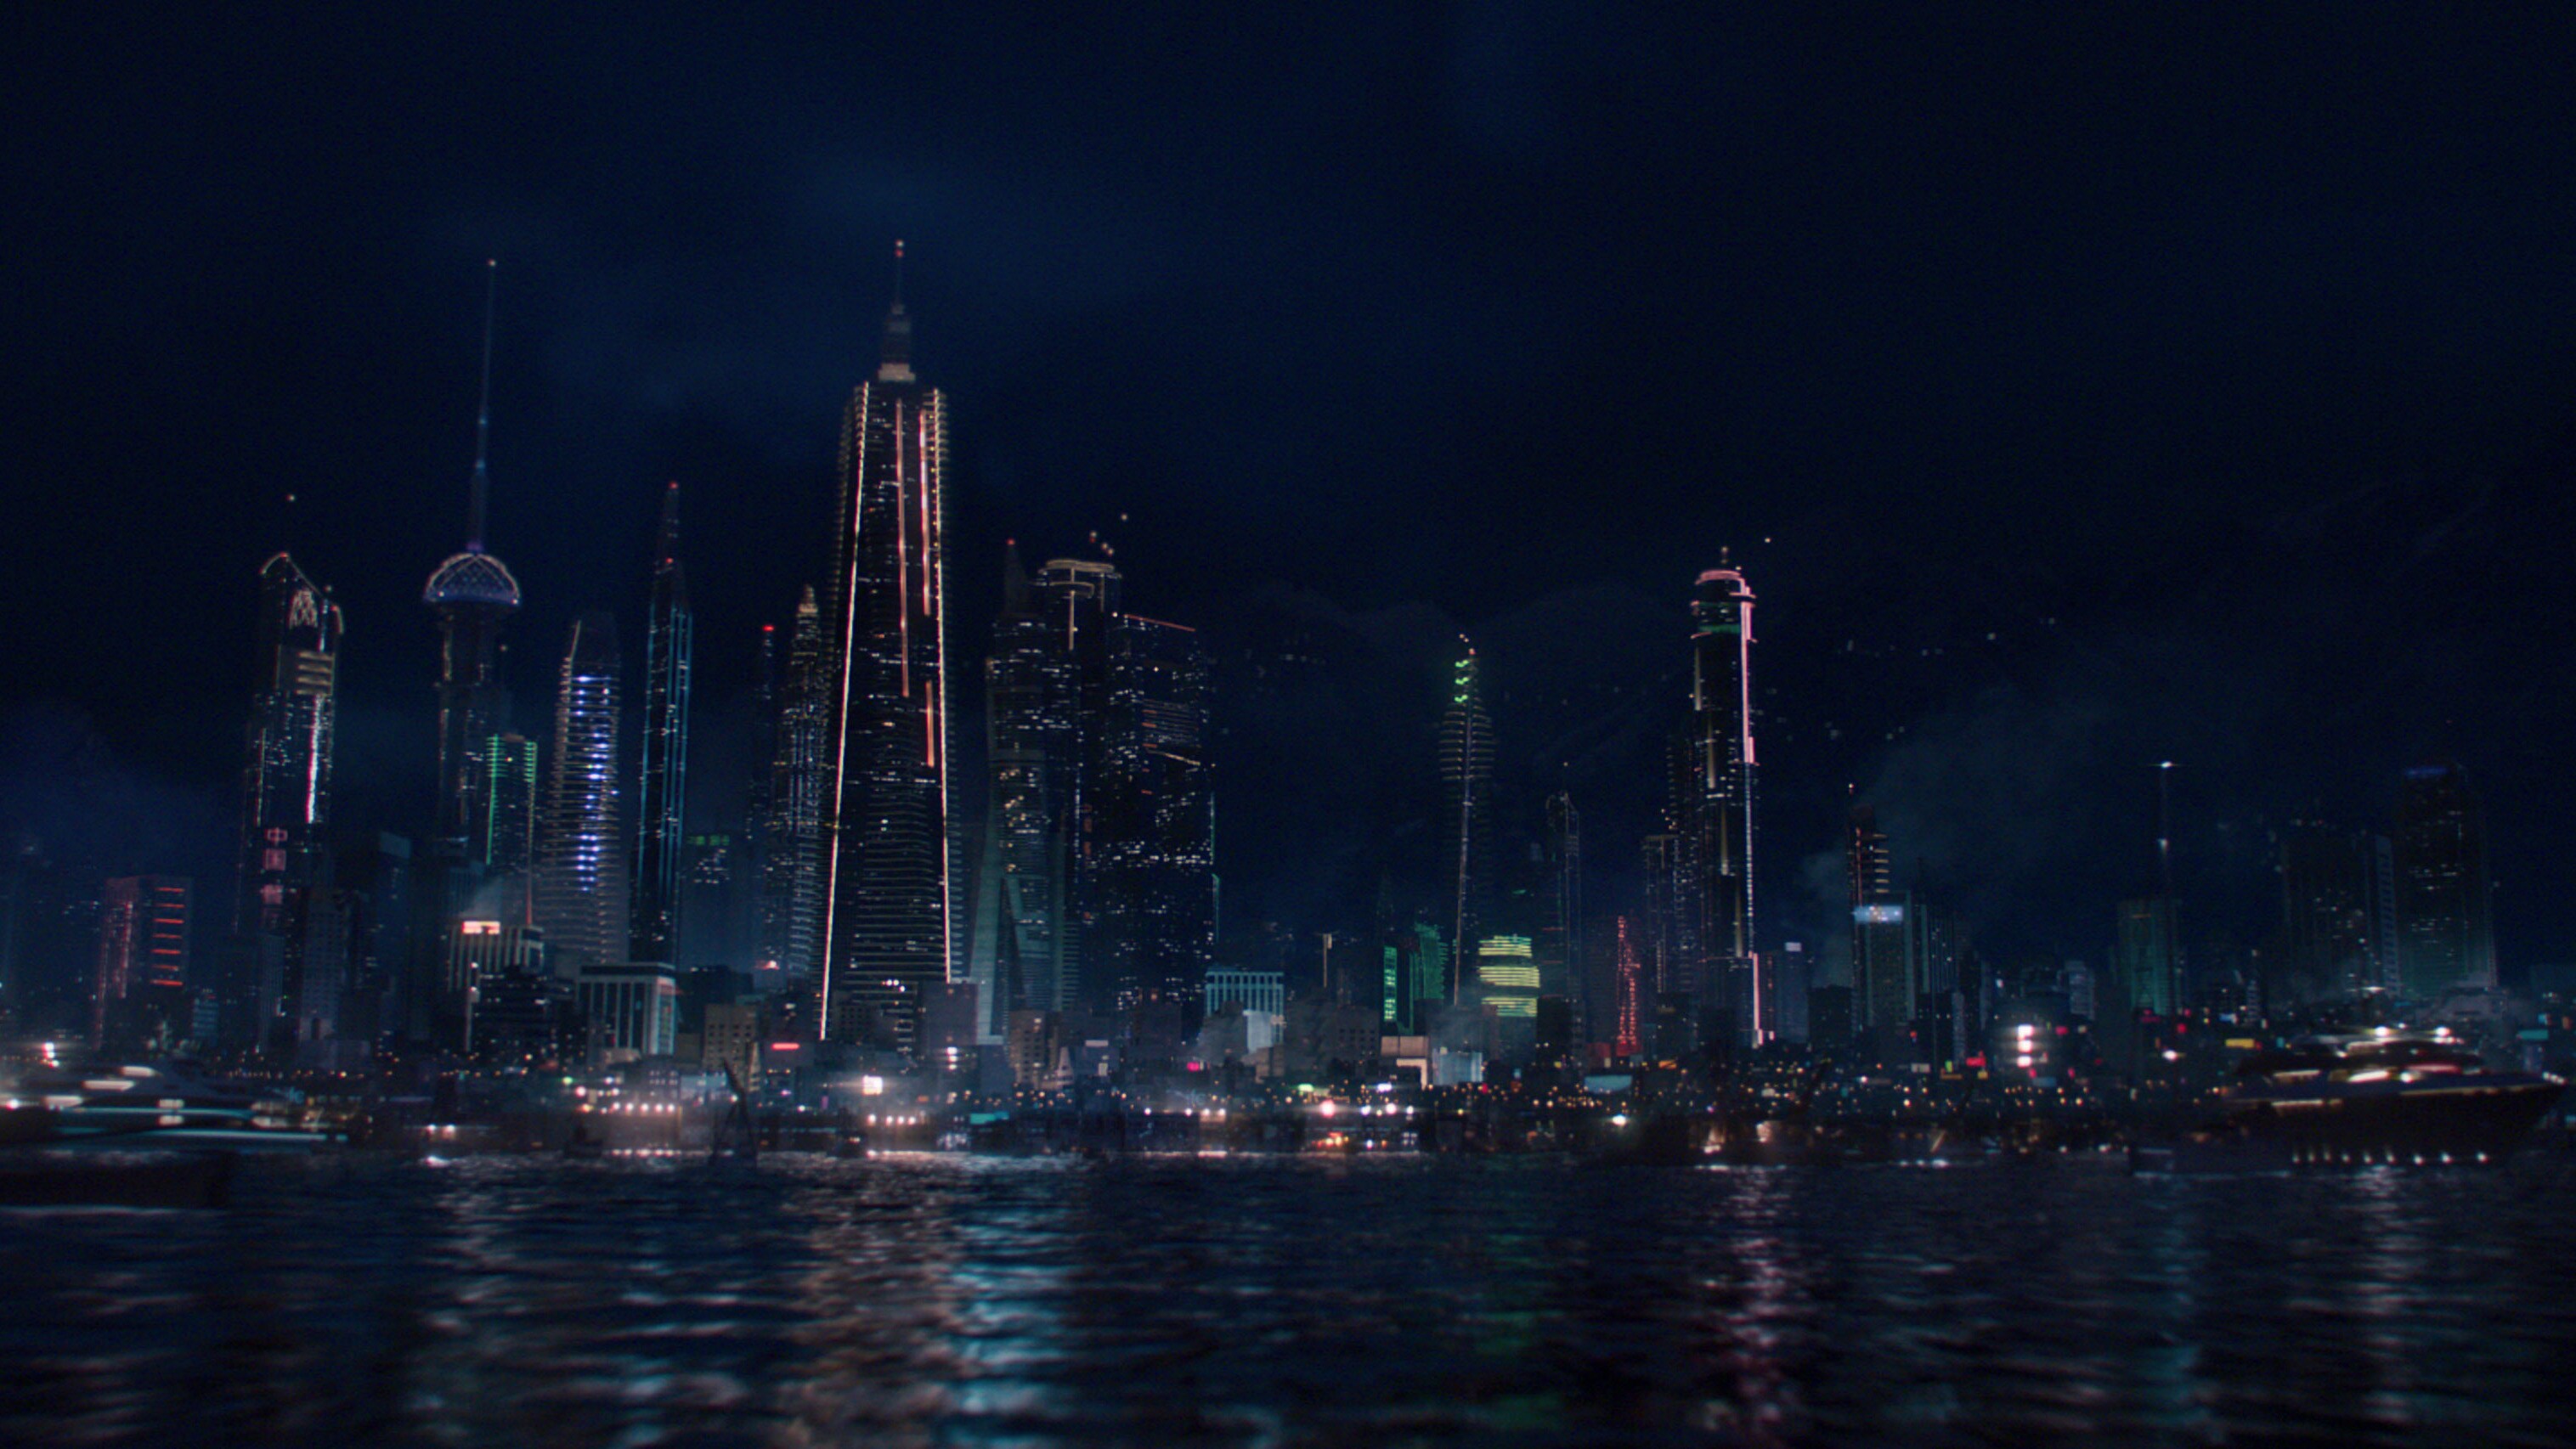 A view of Madripoor from Marvel Studios' THE FALCON AND THE WINTER SOLDIER exclusively on Disney+. Photo courtesy of Marvel Studios. ©Marvel Studios 2021. All Rights Reserved.